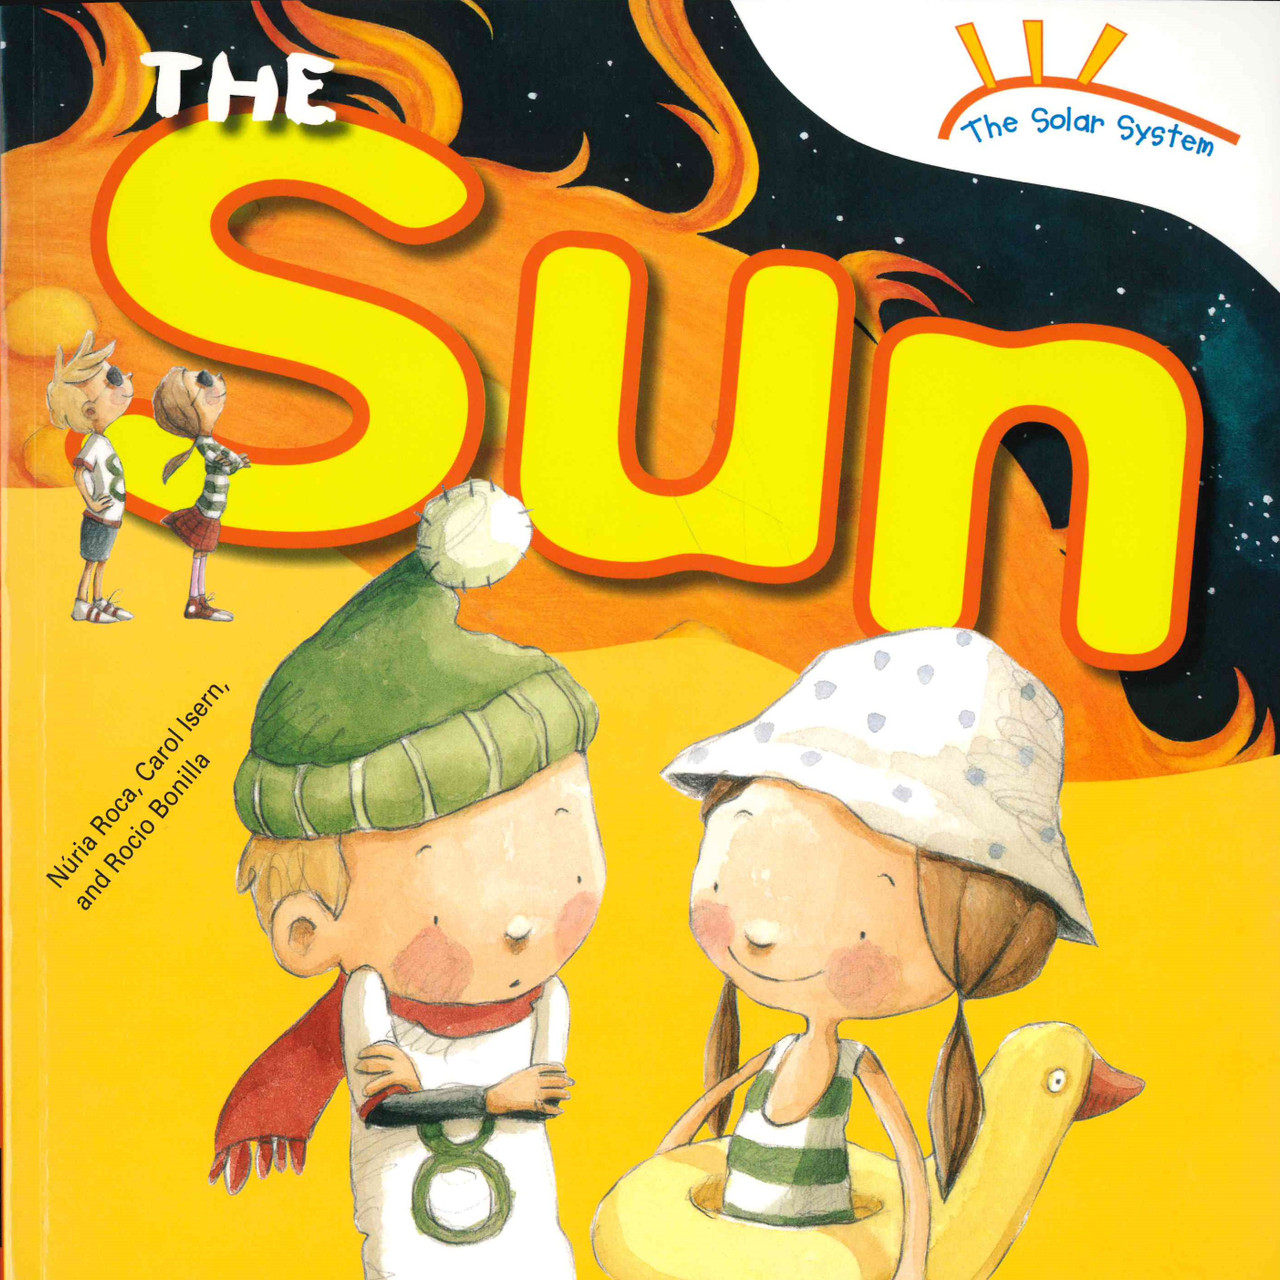 The Solar System for Kids: Books & Resources